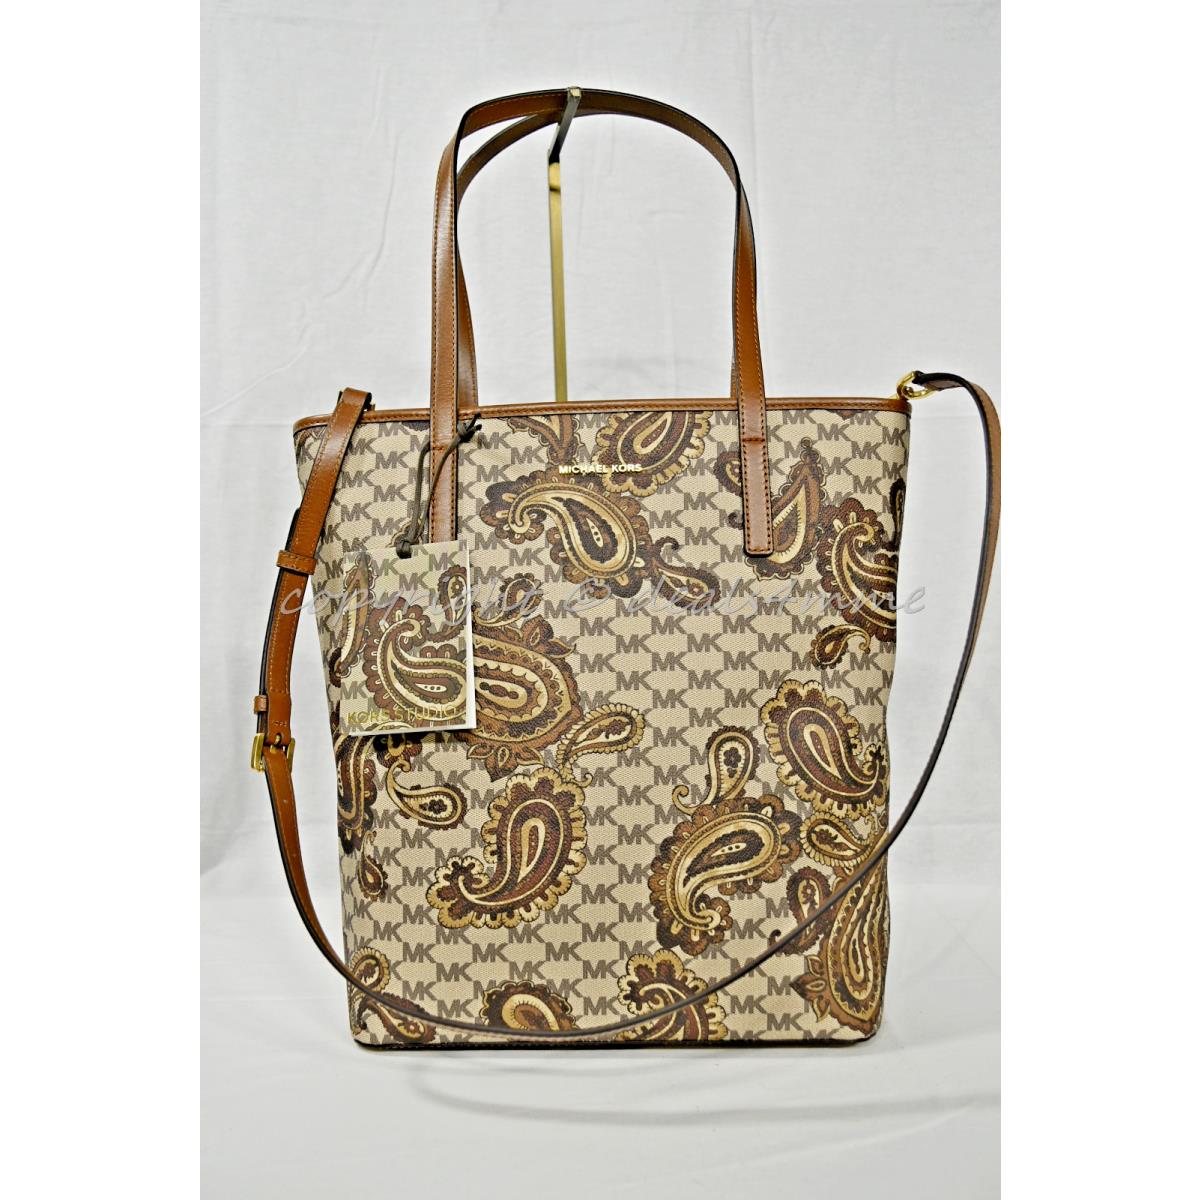 Michael Kors Emry Large North/south Heritage Paisley Tote in Luggage Brown